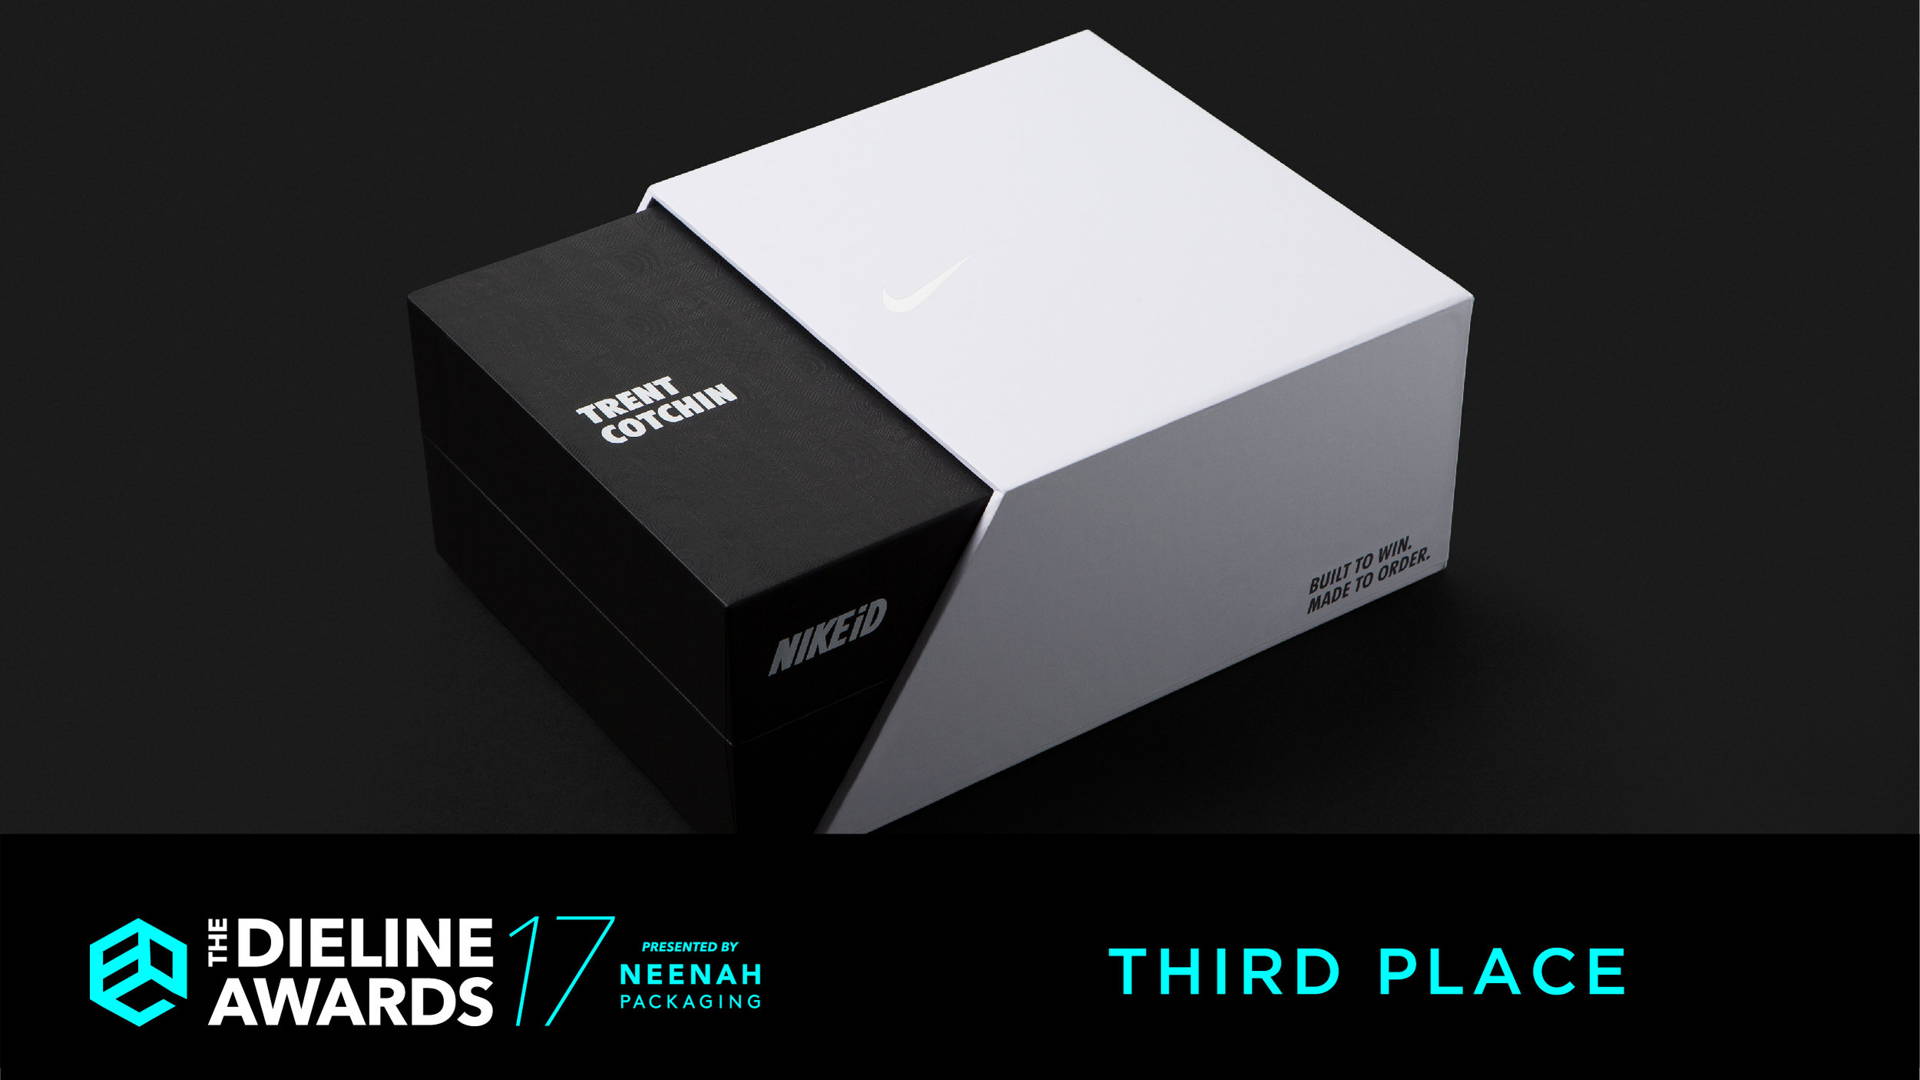 Featured image for The Dieline Awards 2017: NikeID Athlete’s Box